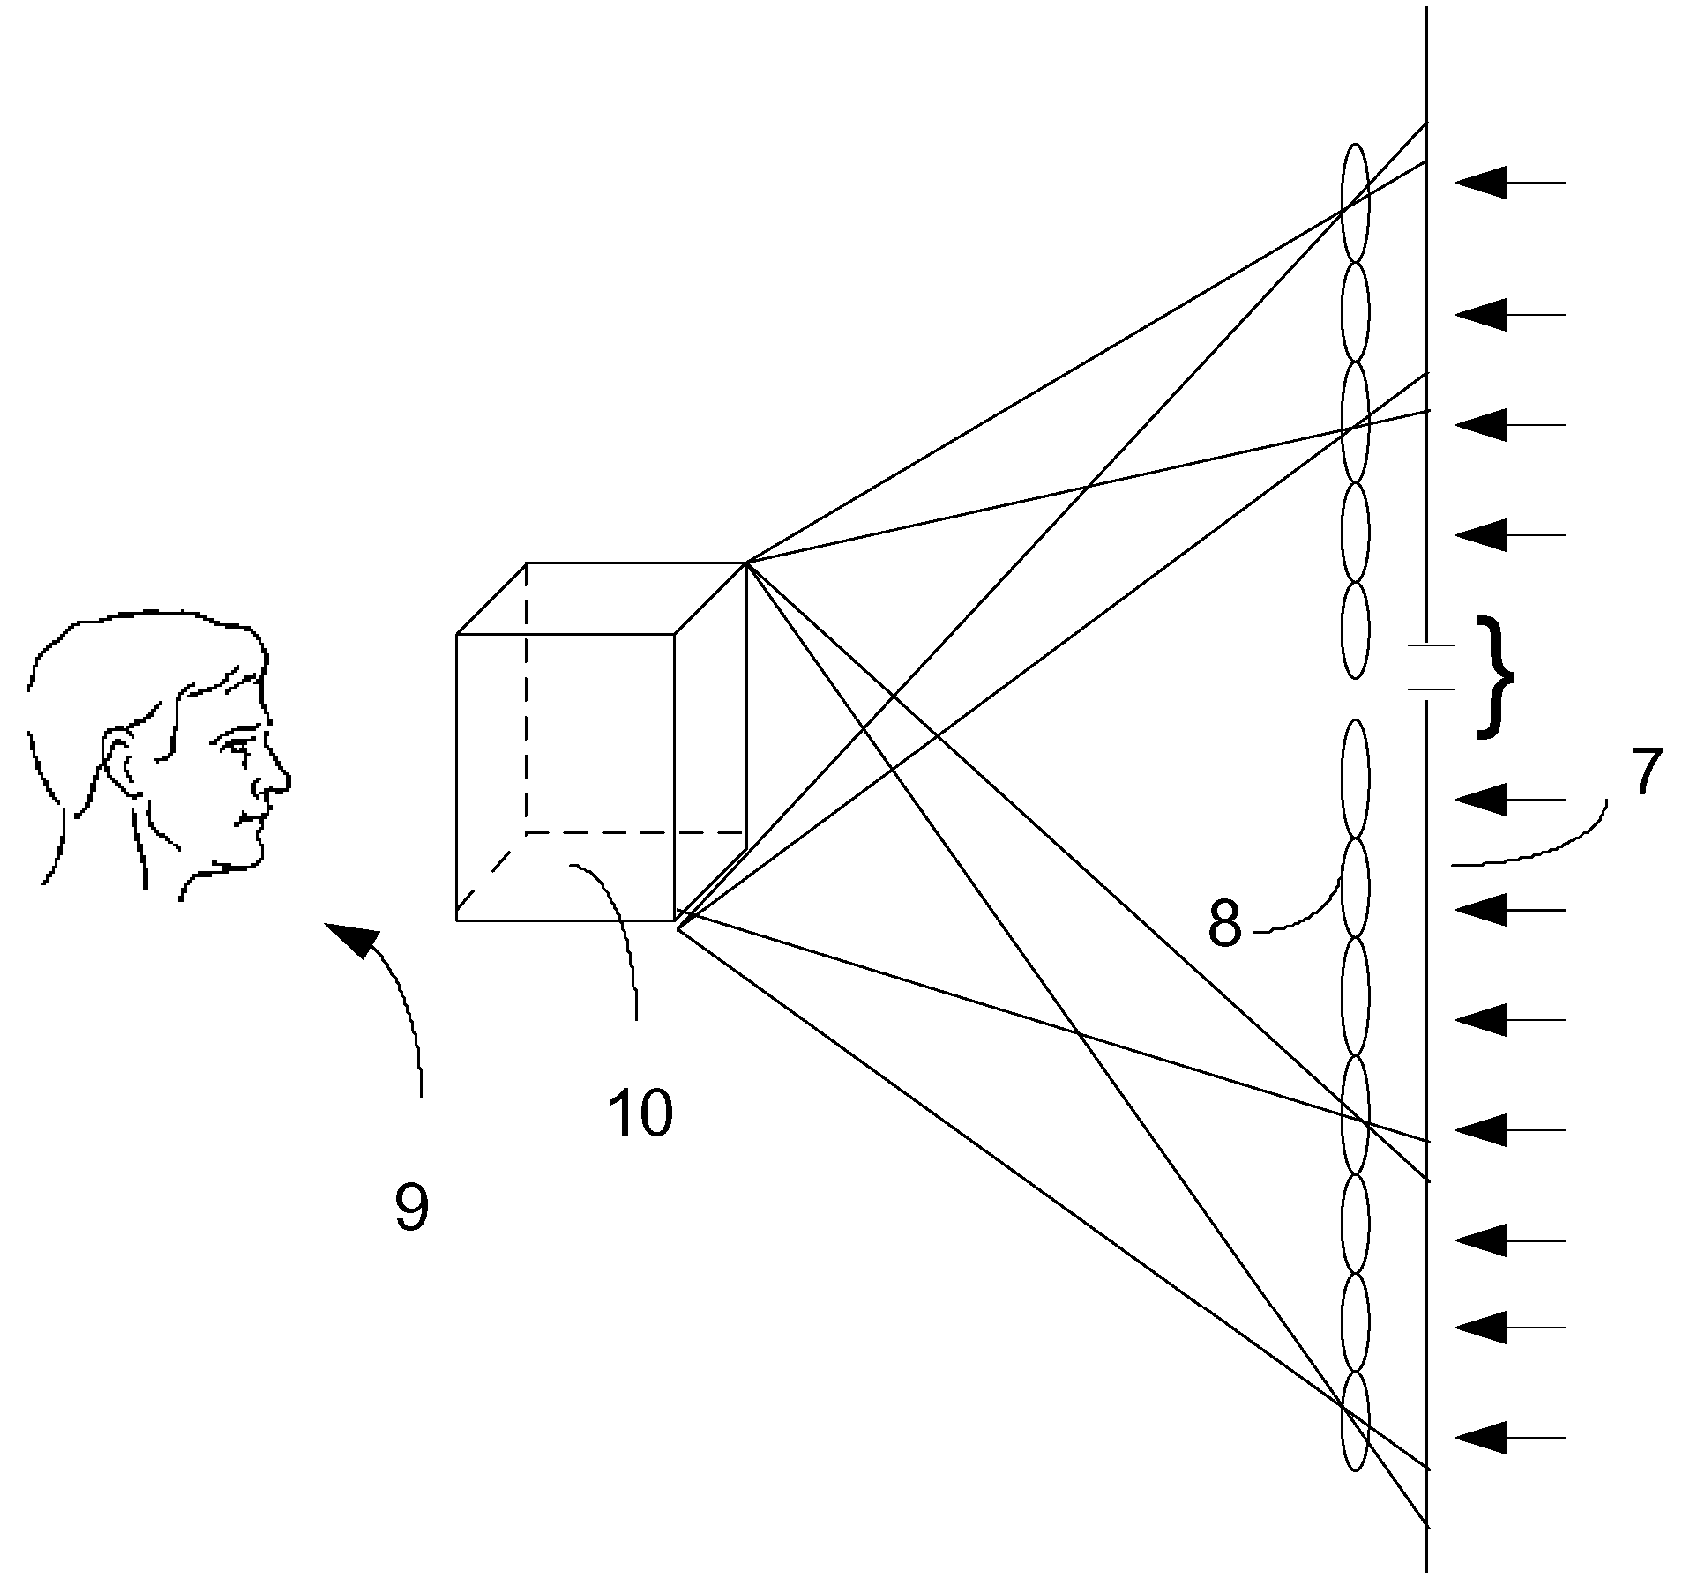 Method for creating a holographic screen that reconstructs uniformly magnified three-dimensional images from projected integral photographs